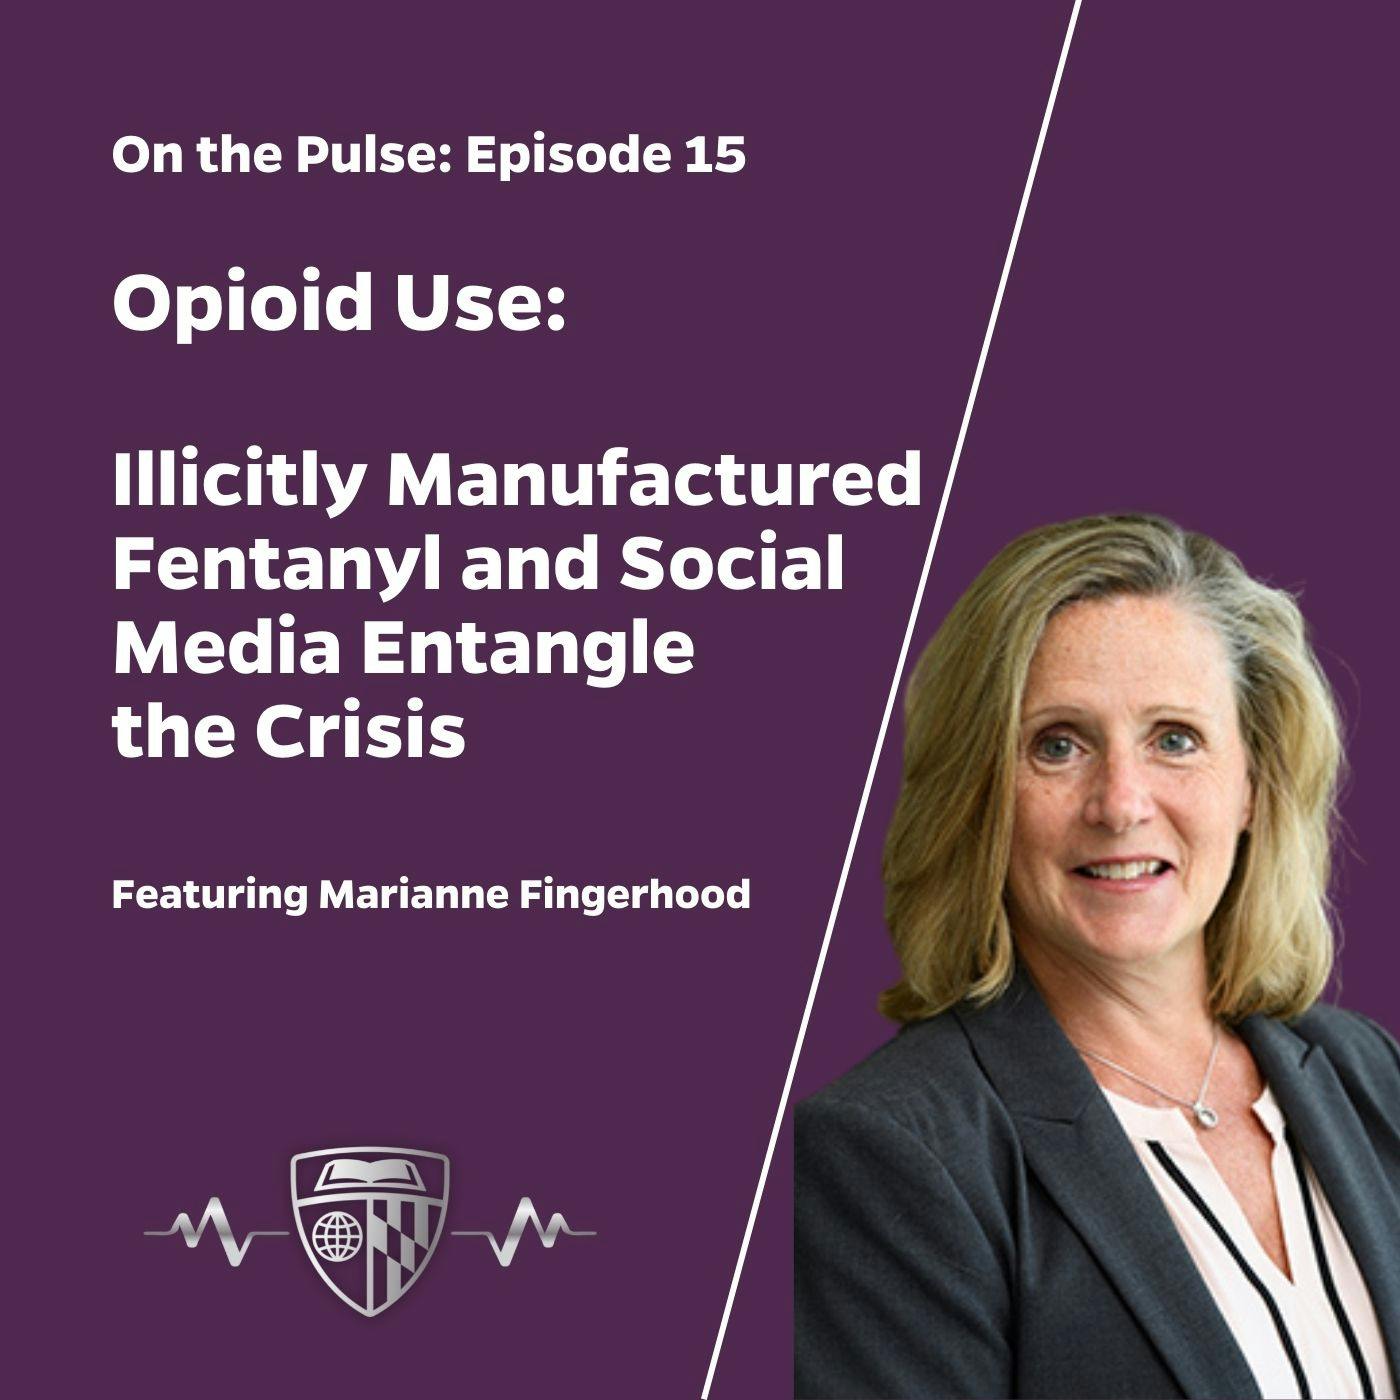 Episode 15: Opioid Use: Illicitly Manufactured Fentanyl and Social Media Entangle the Crisis